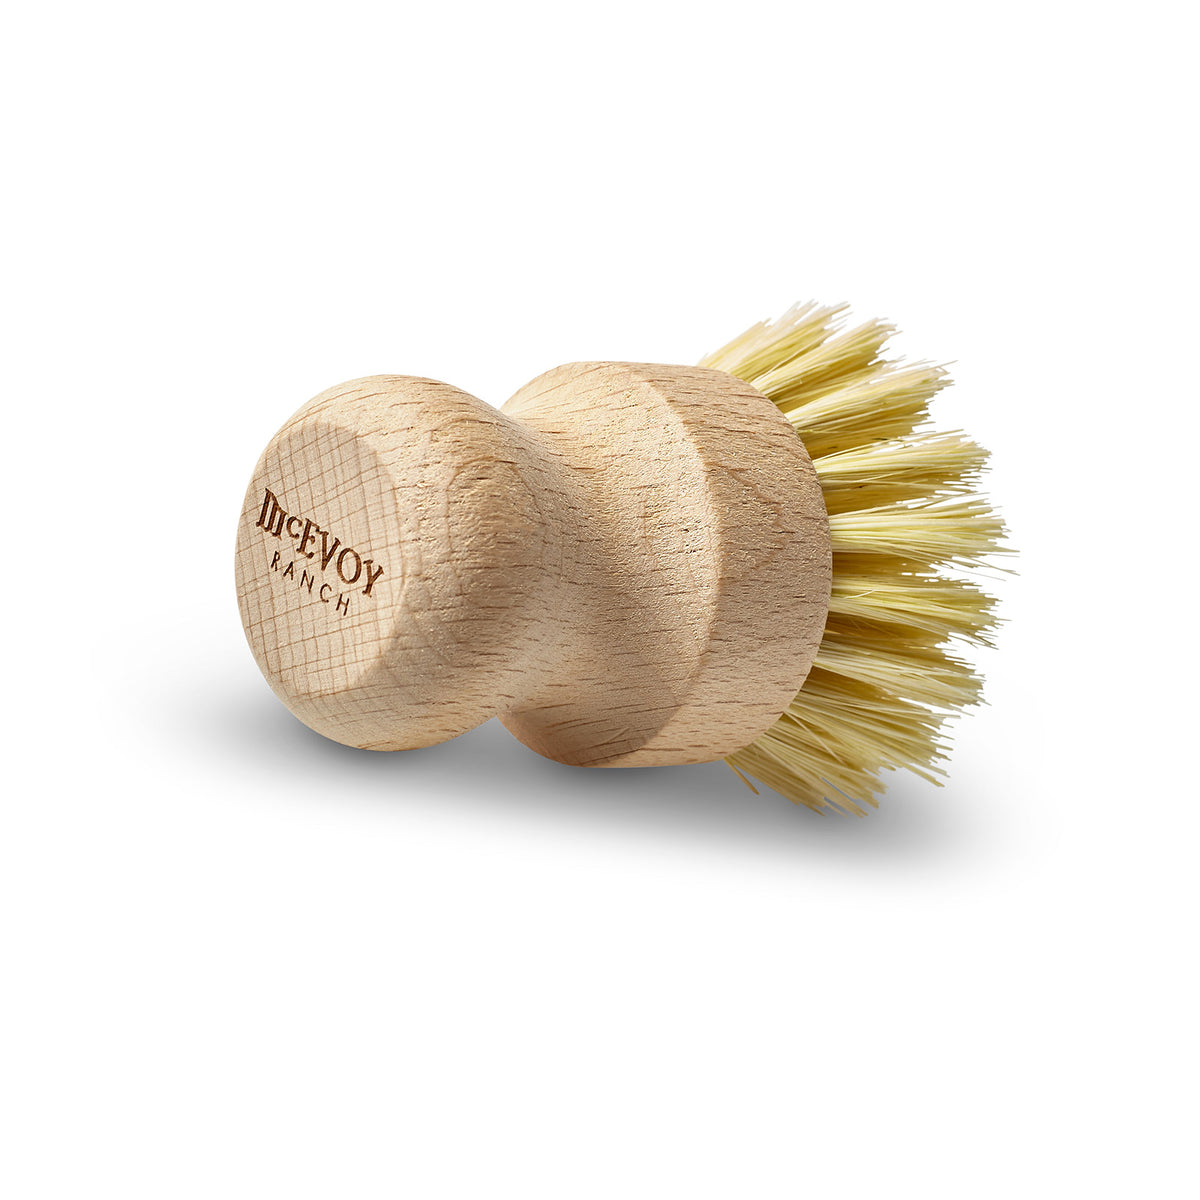 Kitchen Brush - Vegetable Brush Beech Wood (Assorted Patterns) by